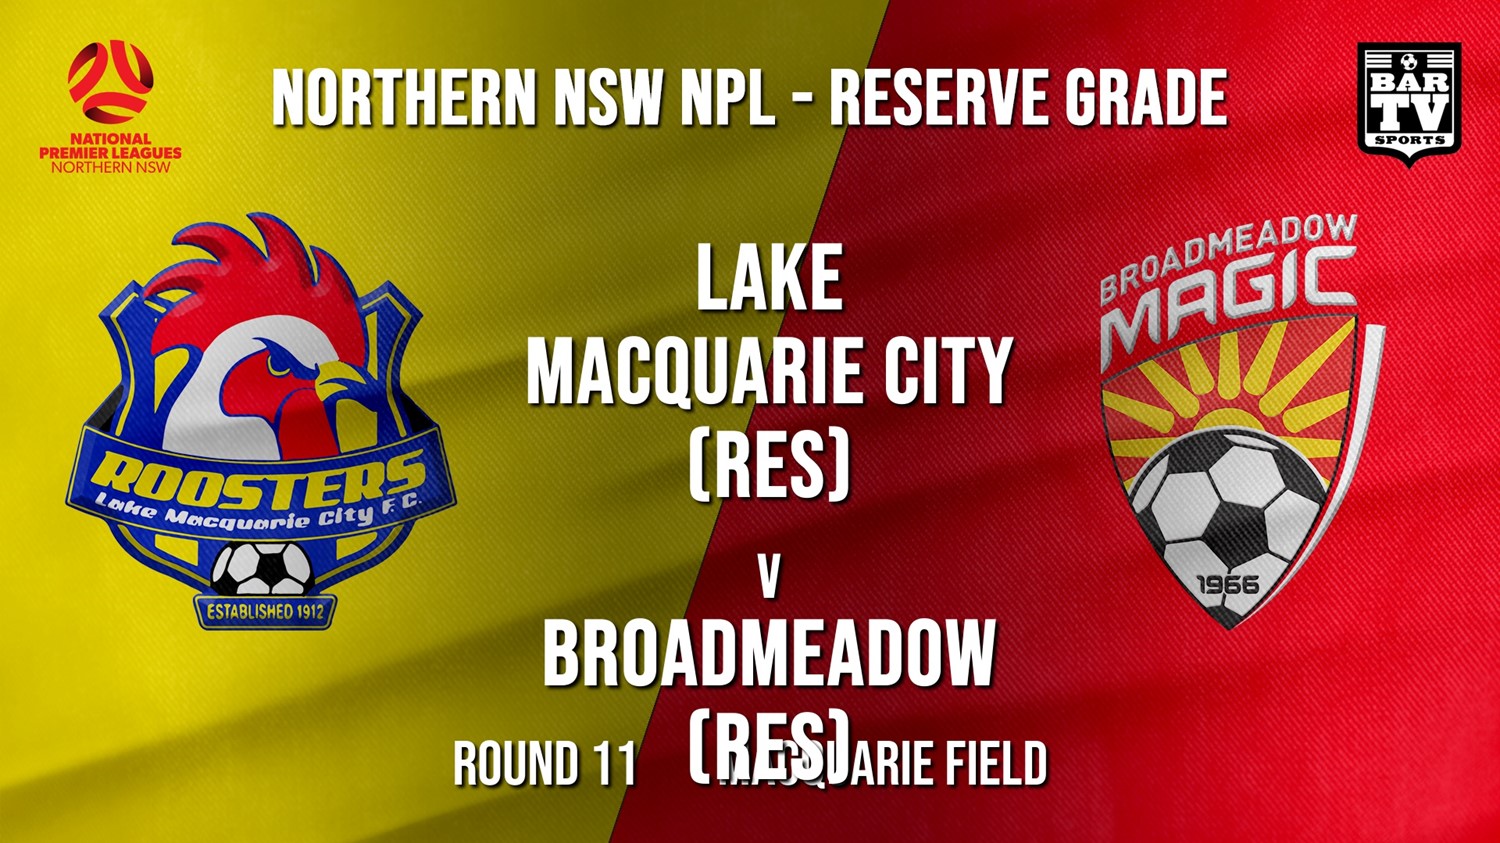 NPL NNSW RES Round 11 - Lake Macquarie City FC (Res) v Broadmeadow Magic (Res) Minigame Slate Image